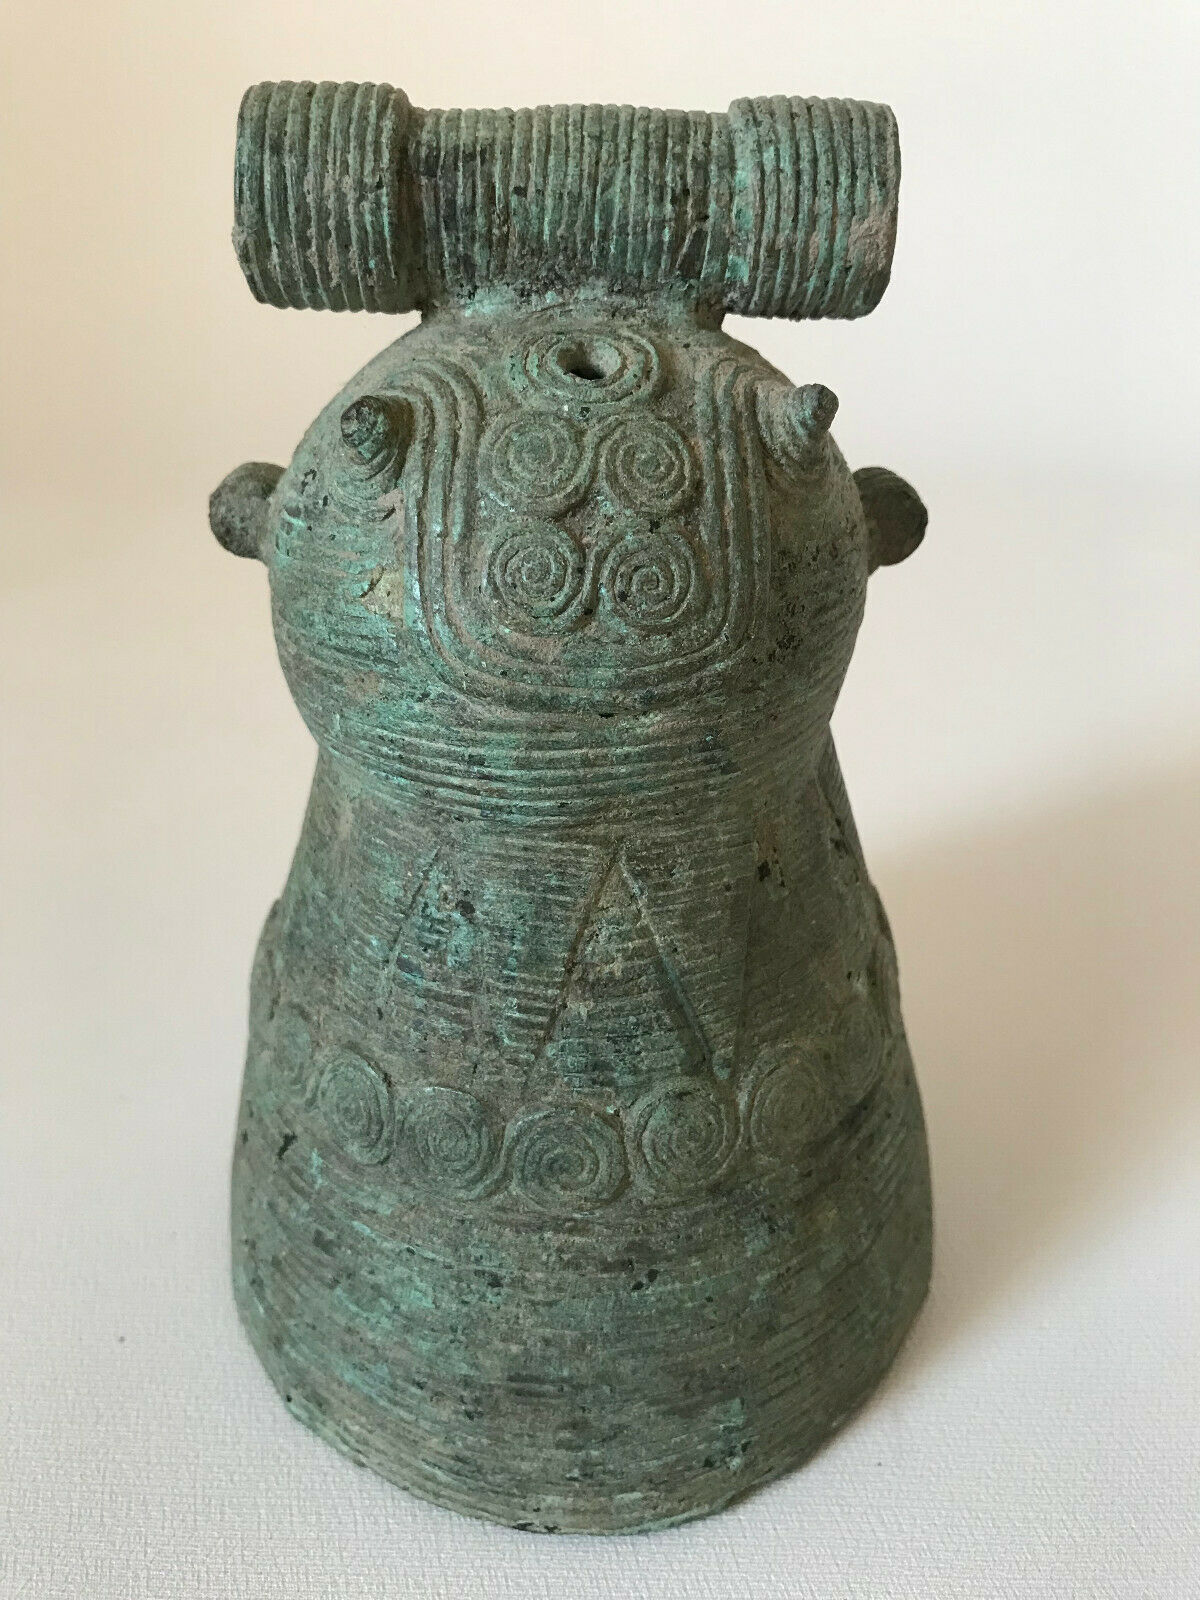 Antique Valuations: Dong Son Bronze, ca 600 - 200 BC